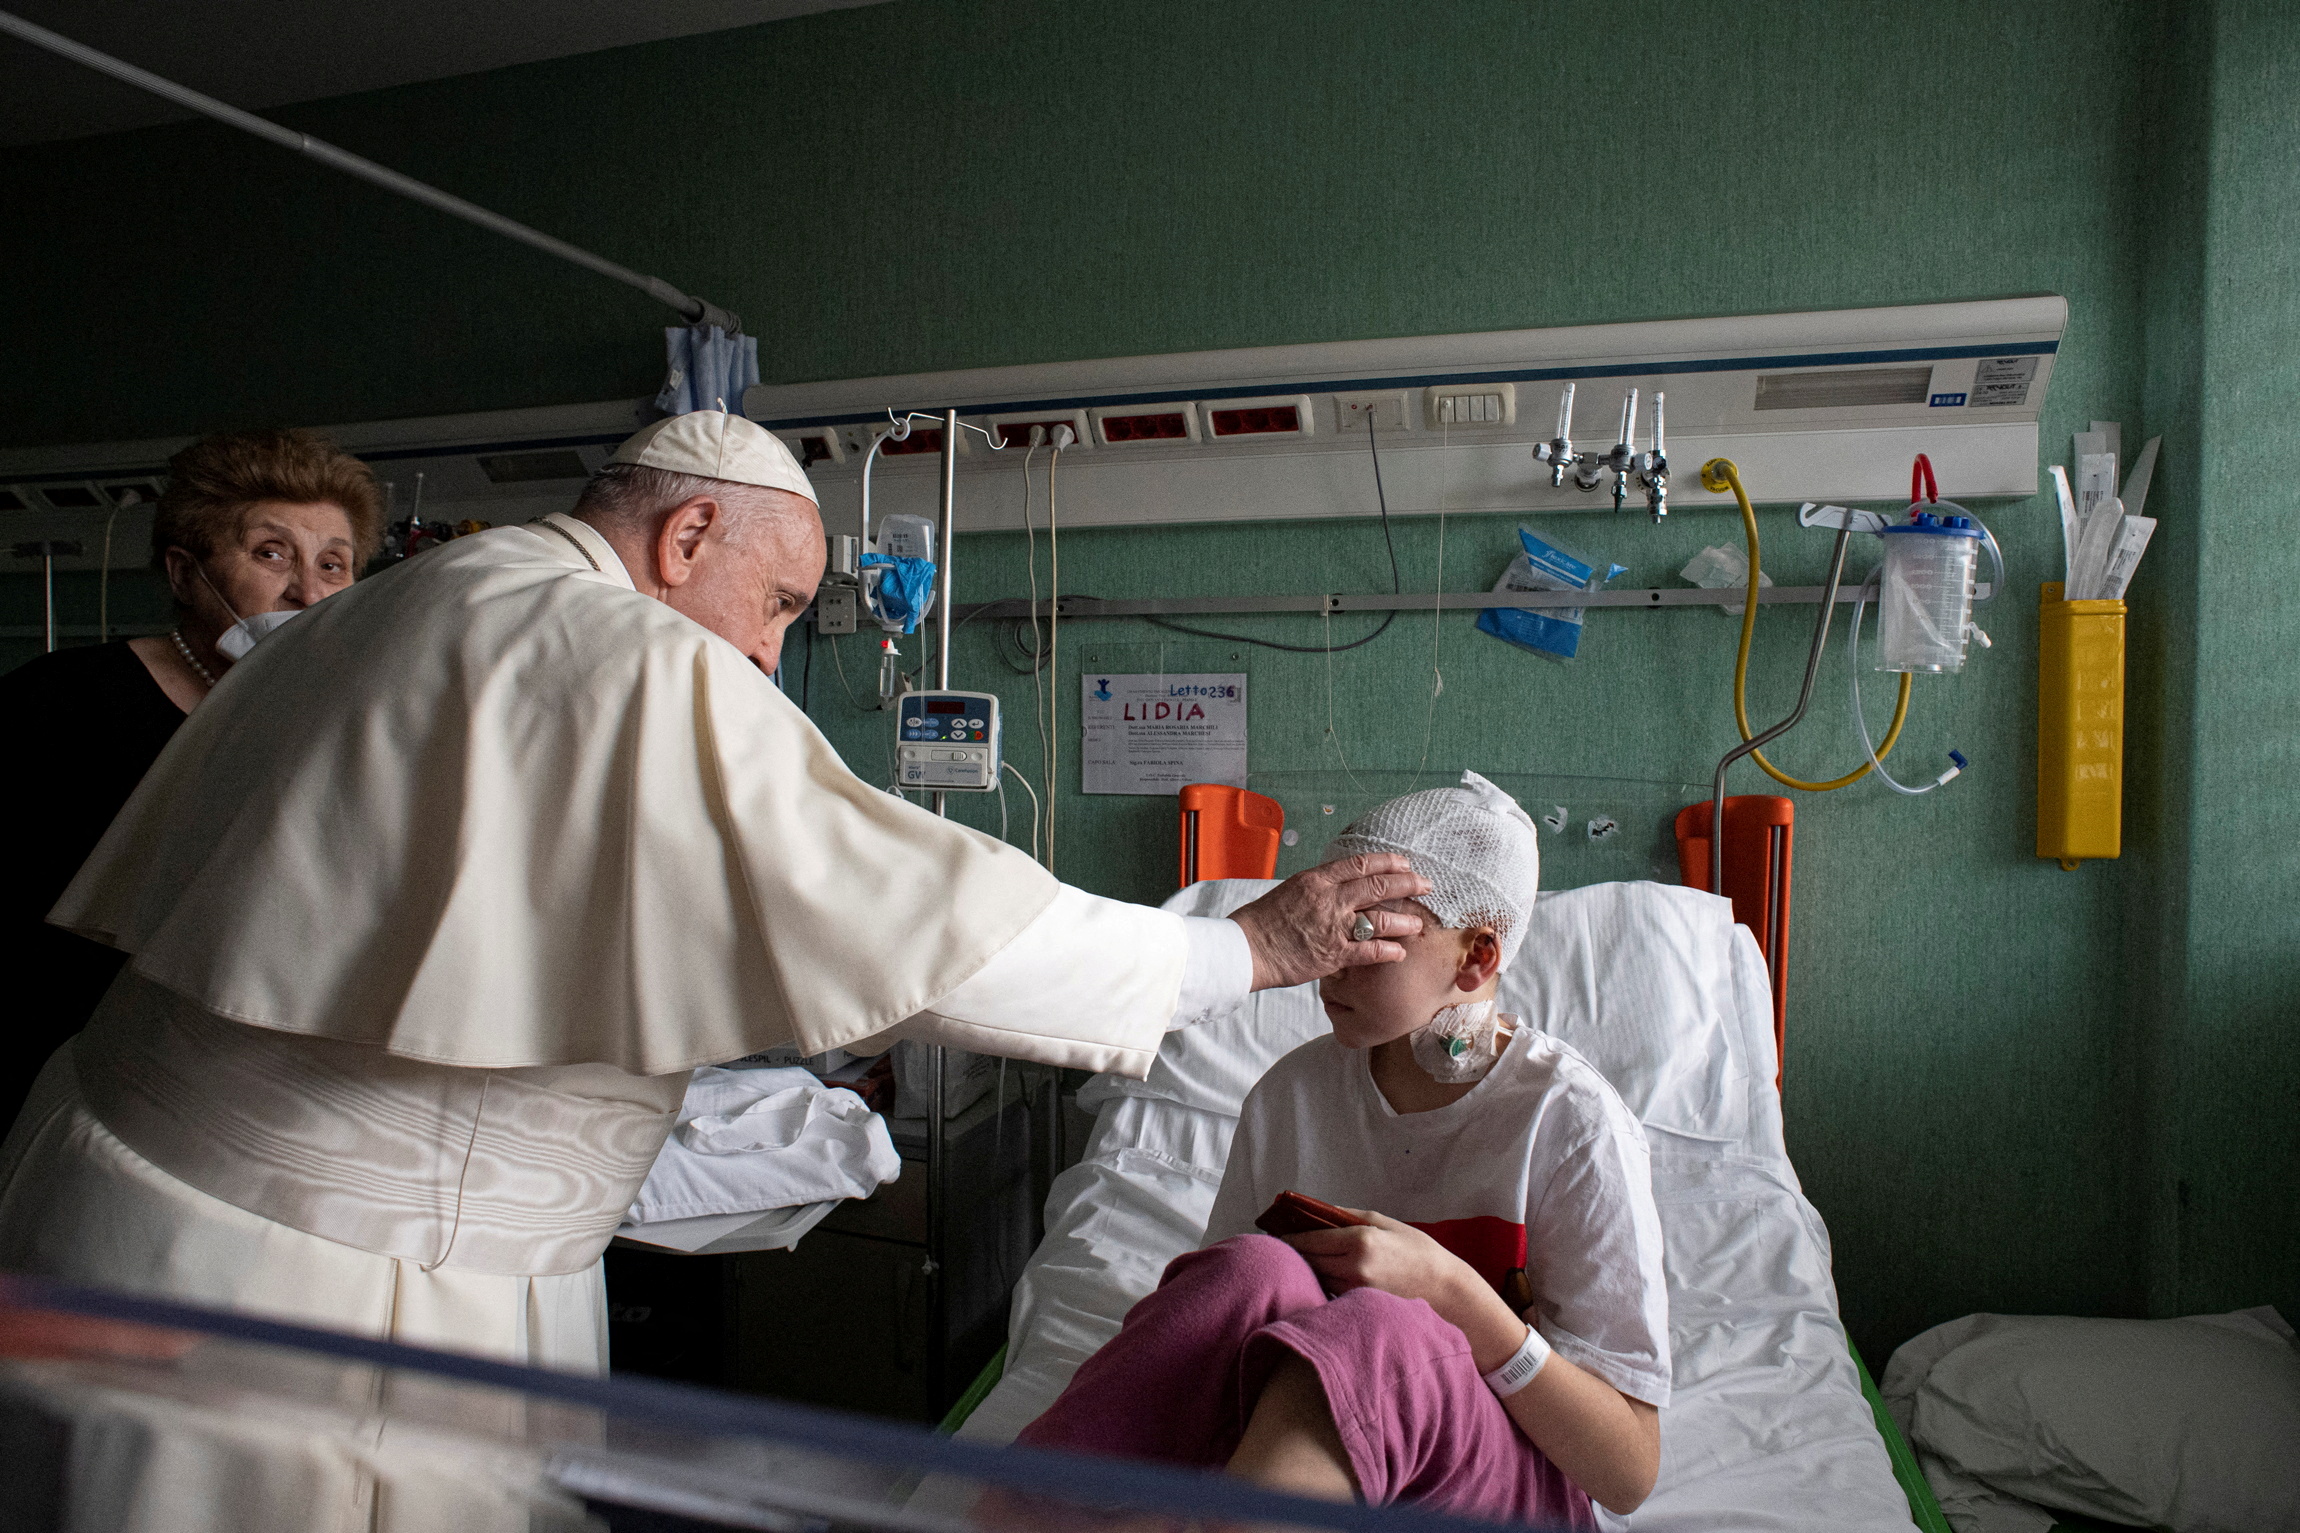 Pope Francis visits Bambino Gesu Pediatric Hospital to thank for caring for Ukrainian children